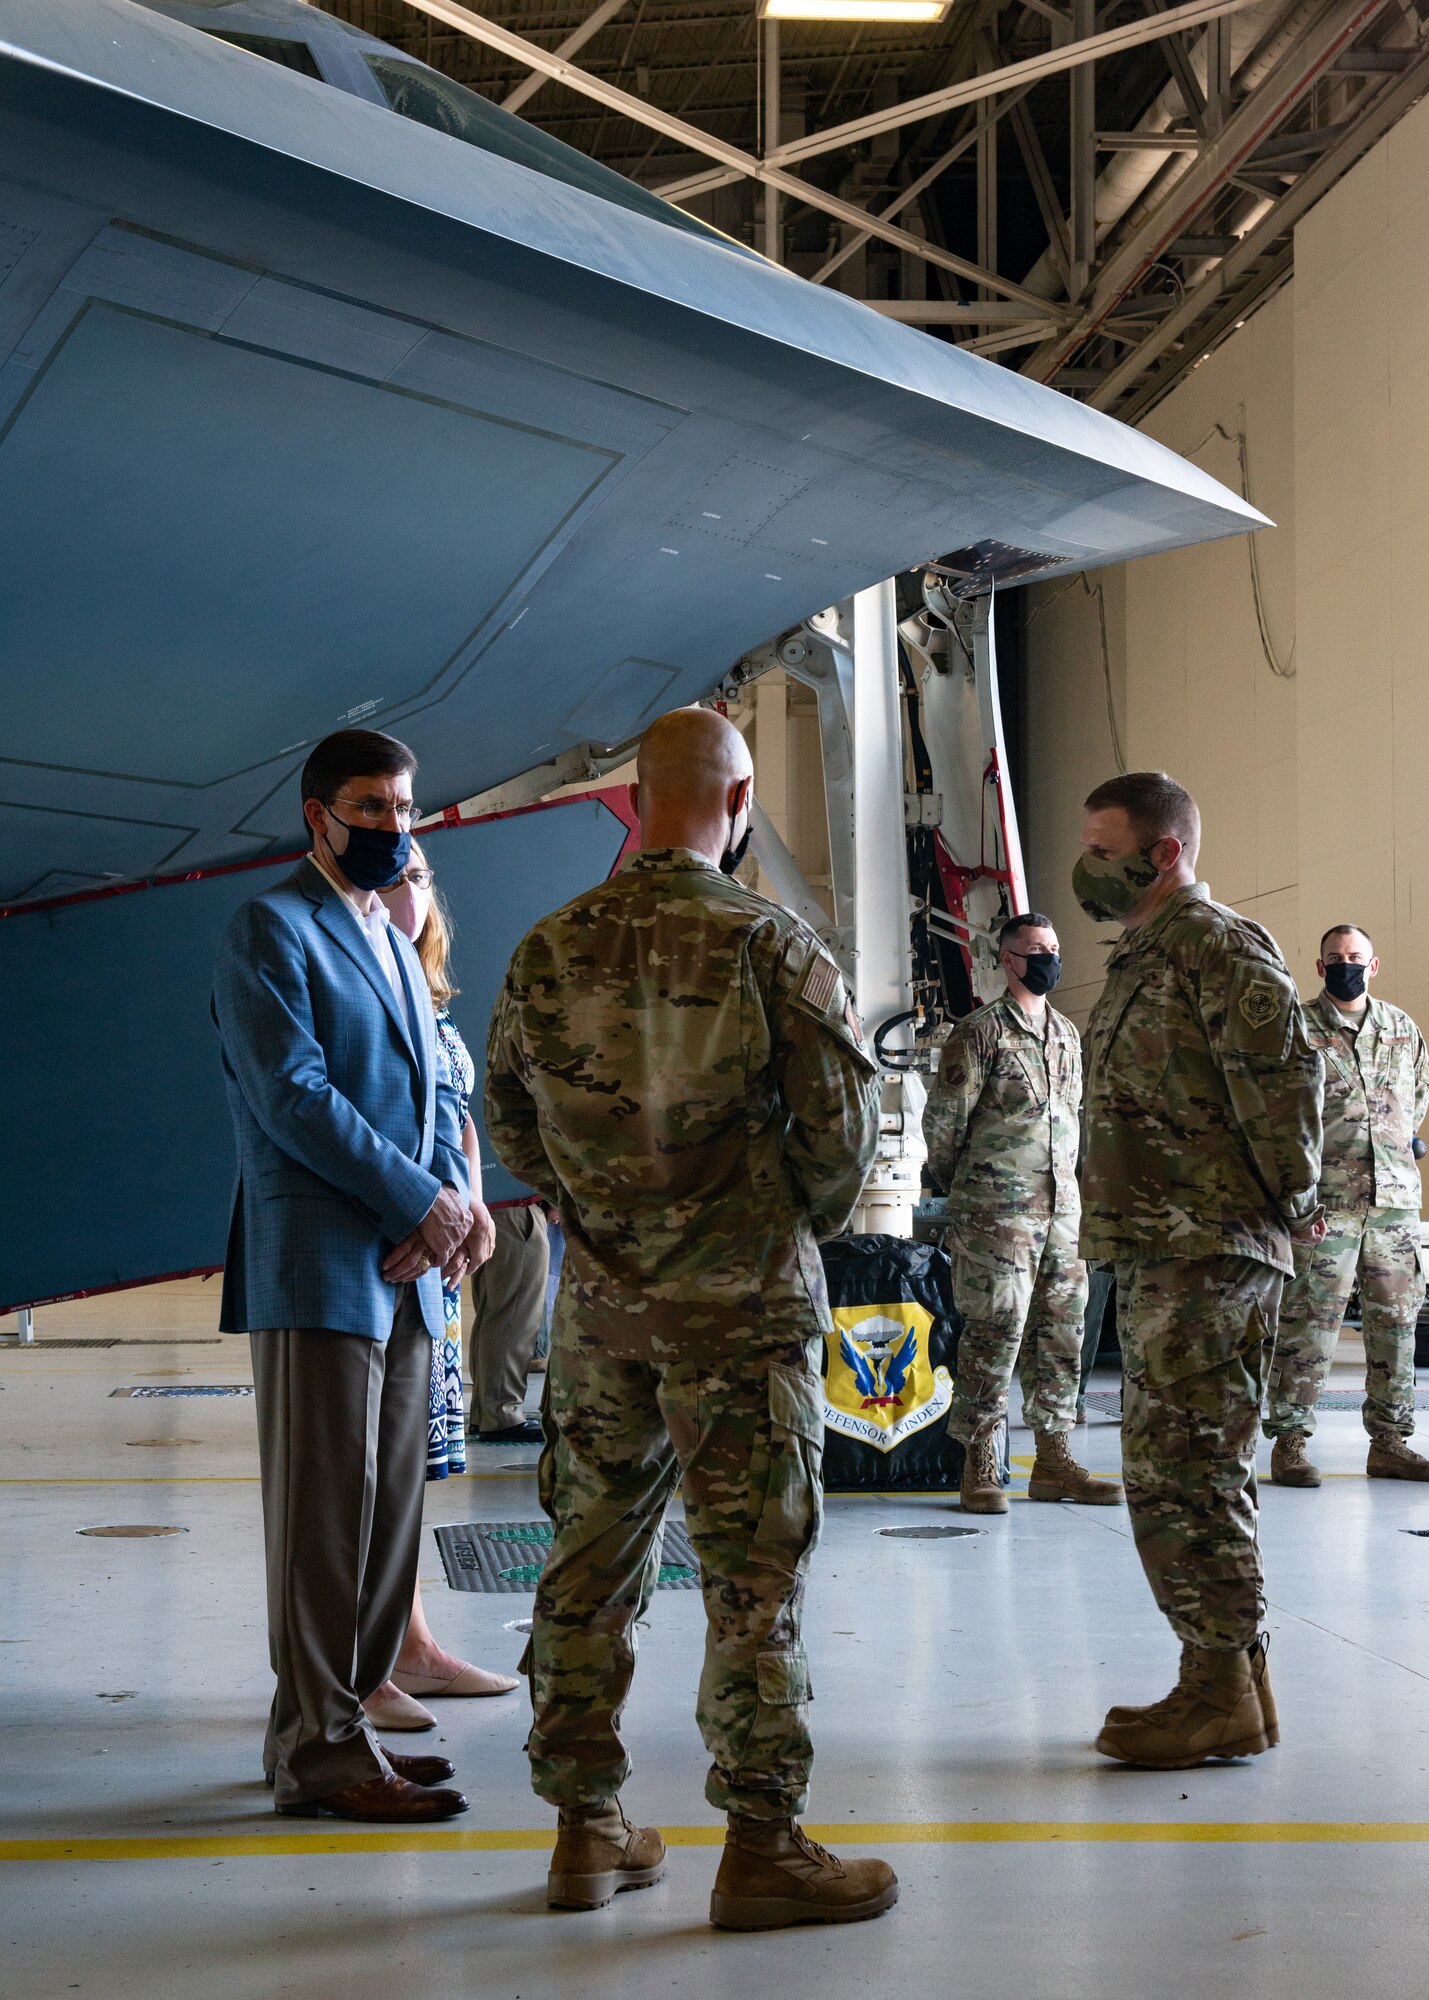 U.S. Secretary of Defense Dr. Mark T. Esper  speaks with 509th and 131st Bomb Wing maintainers during a visit at Whiteman Air Force Base, Missouri, July 22, 2020. During his visit Esper received an in-person introduction to various aspects of Team Whiteman's mission, total-force integration with its Air National Guard partner unit and maintenance of B-2 Spirit combat readiness during COVID-19. Esper met with Airmen to discuss diversity and inclusion in the ranks — as he has done at DOD installations around the world in the last month. (U.S. Air Force photo by Senior Airman Thomas Barley)